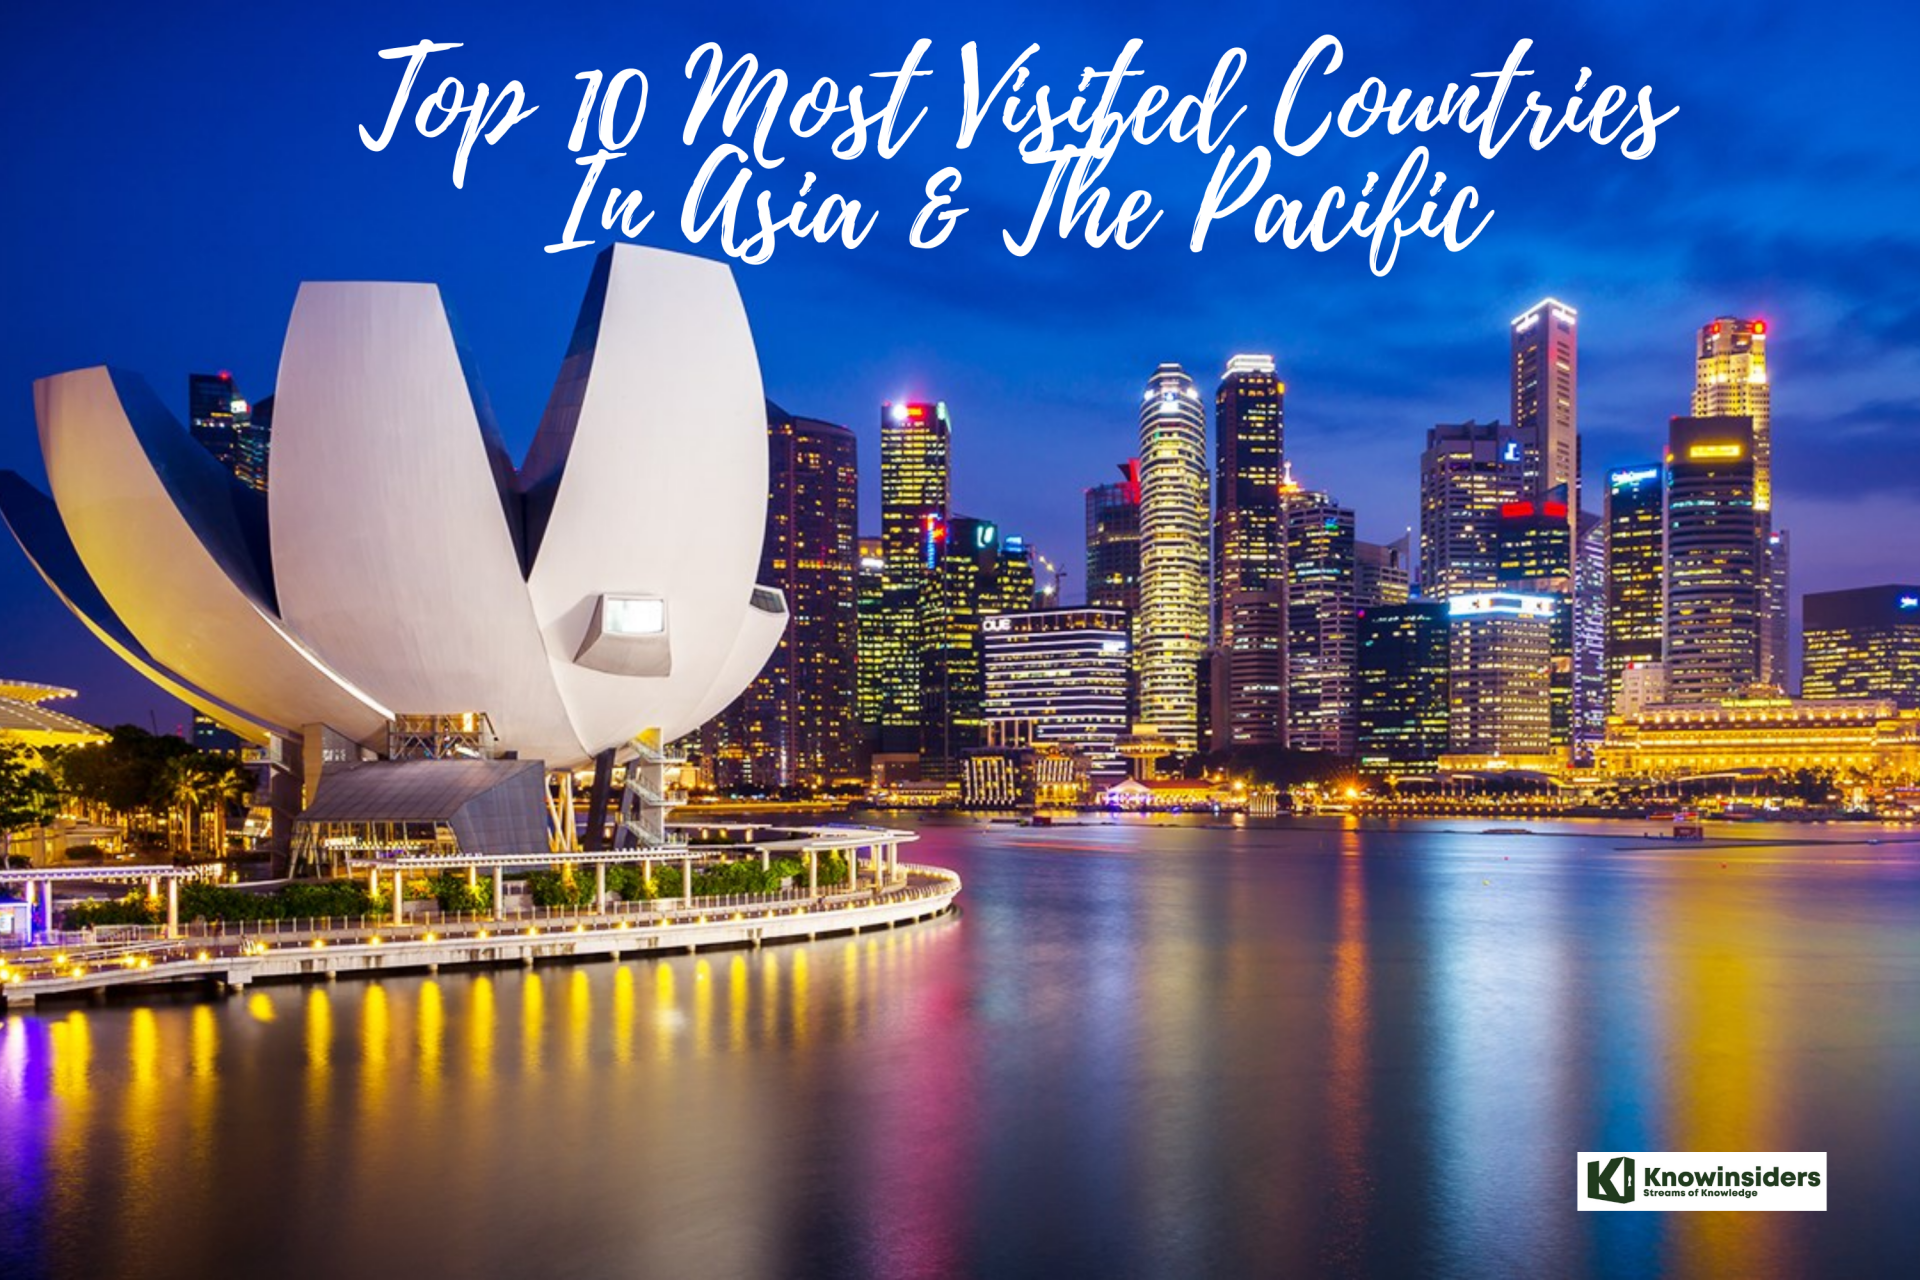 Top 10 Most Visited Countries In Asia & The Pacific